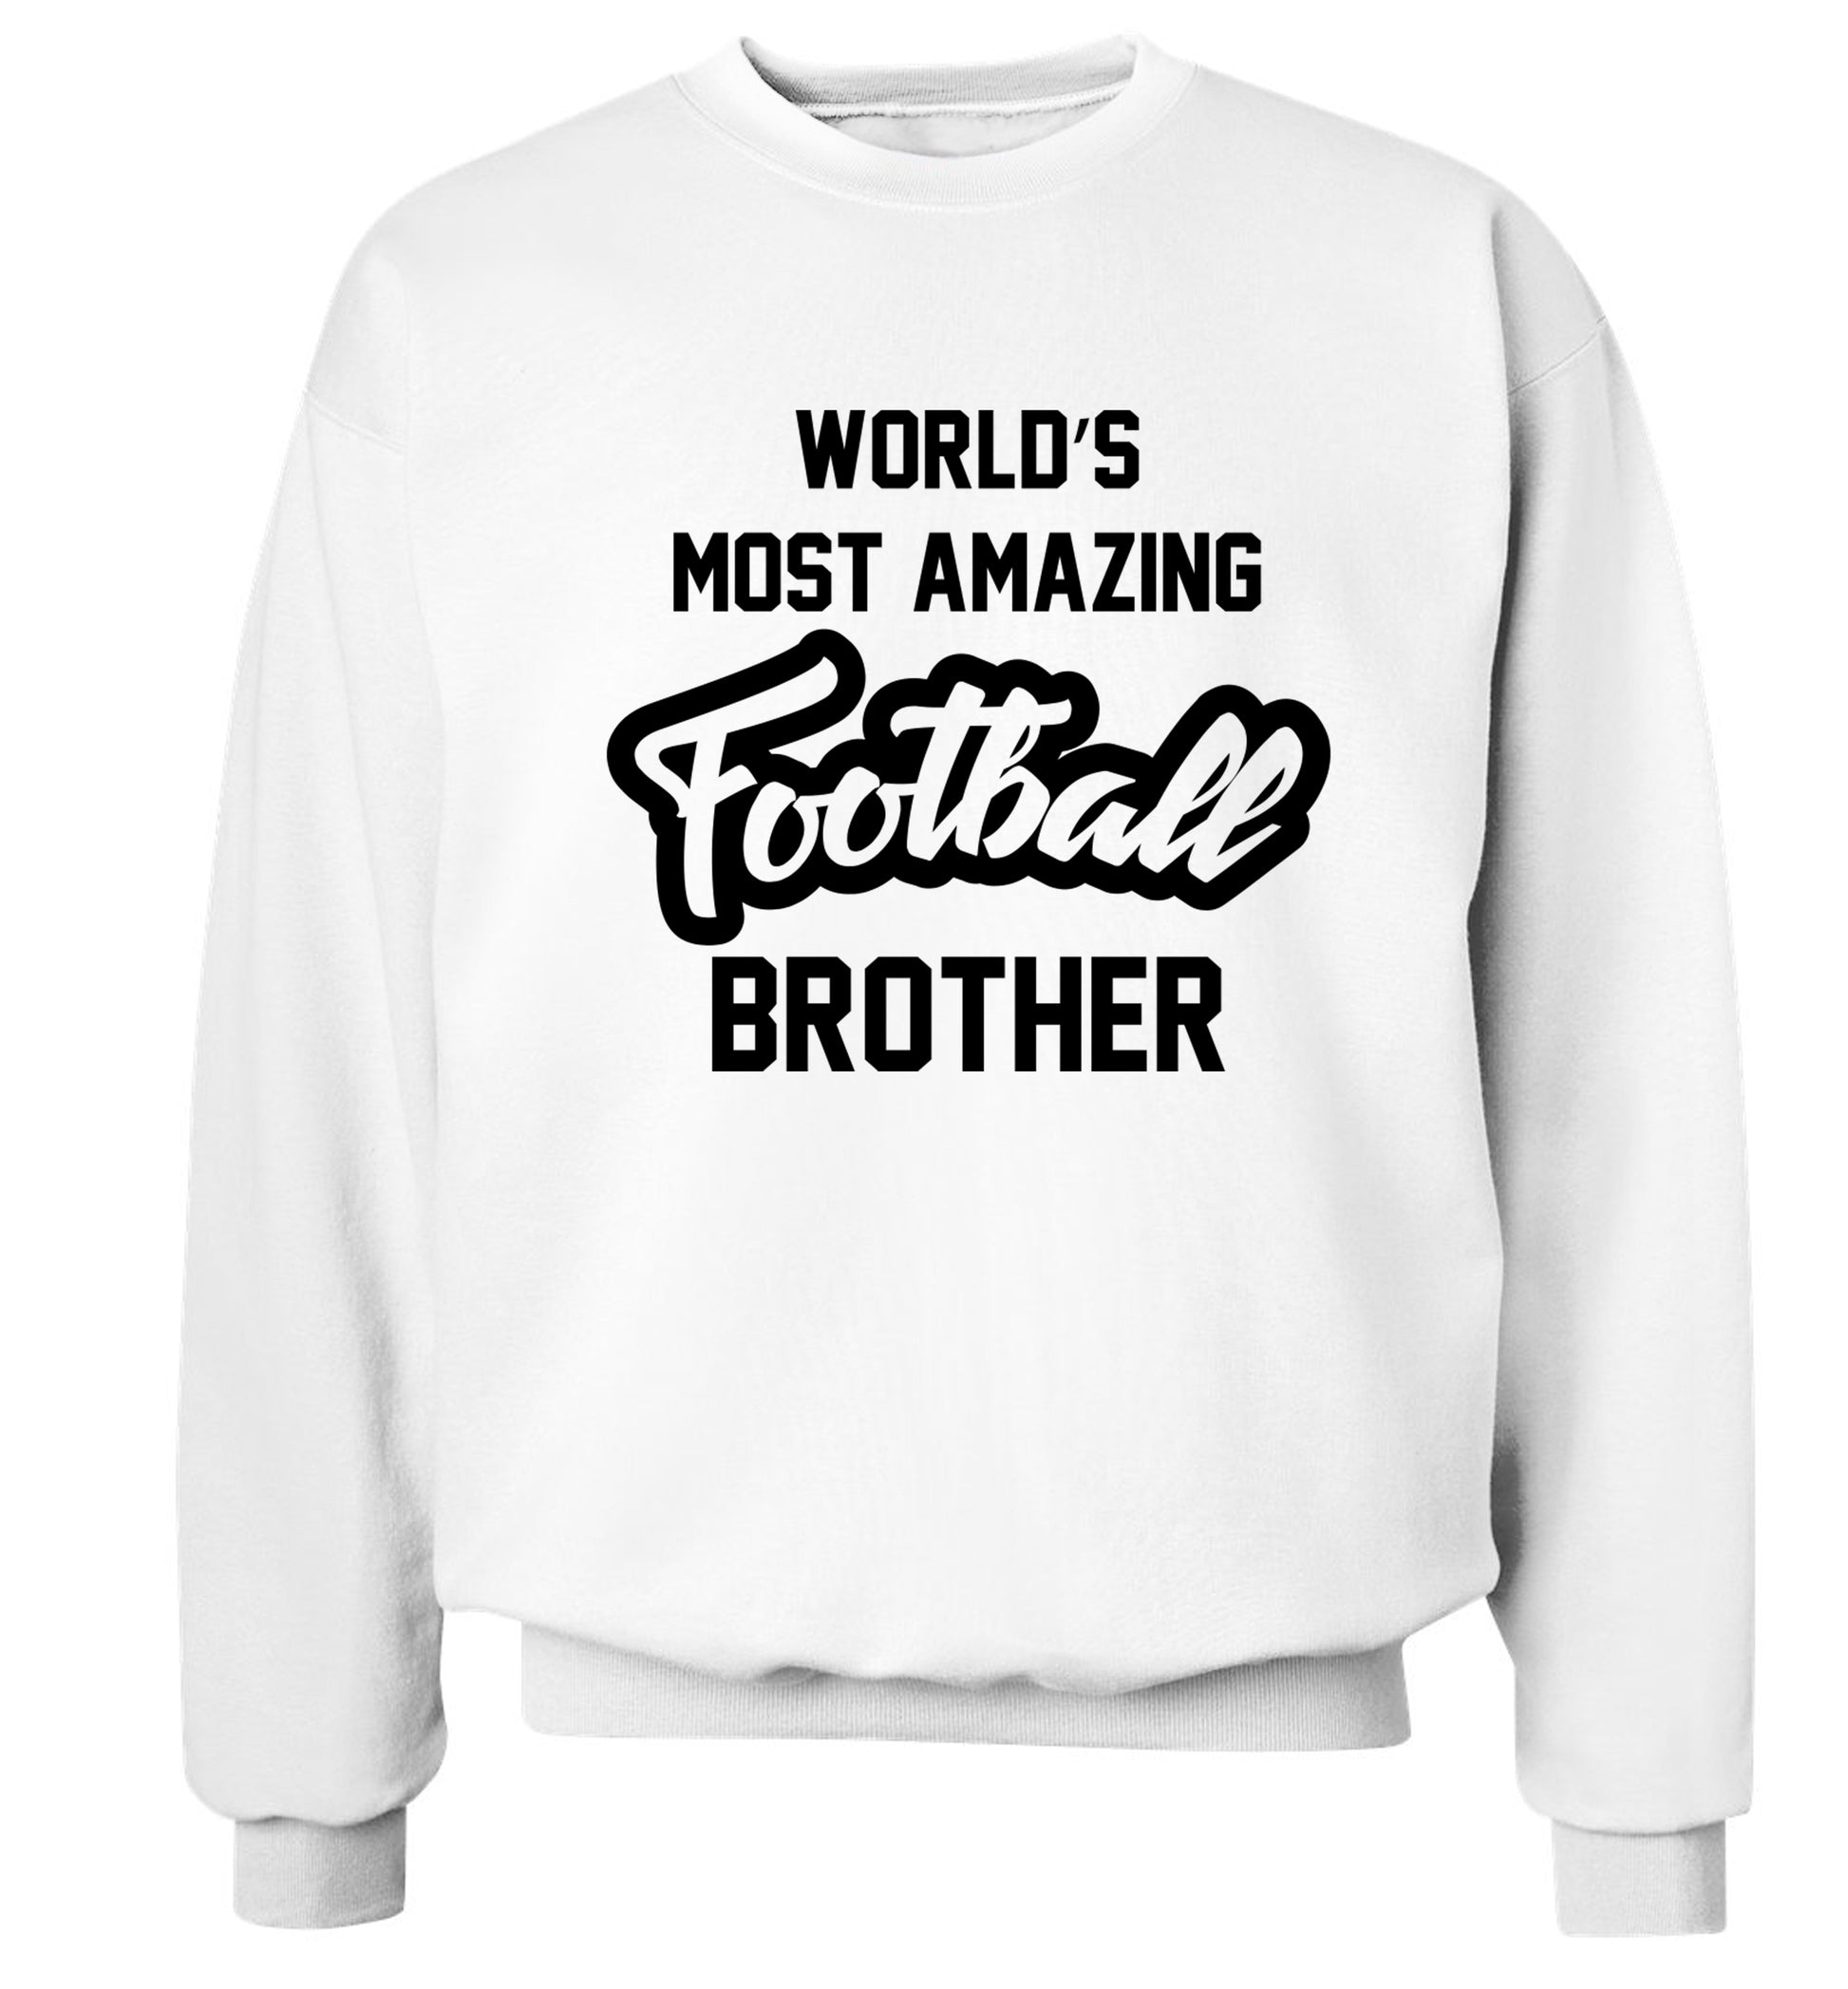 Worlds most amazing football brother Adult's unisexwhite Sweater 2XL